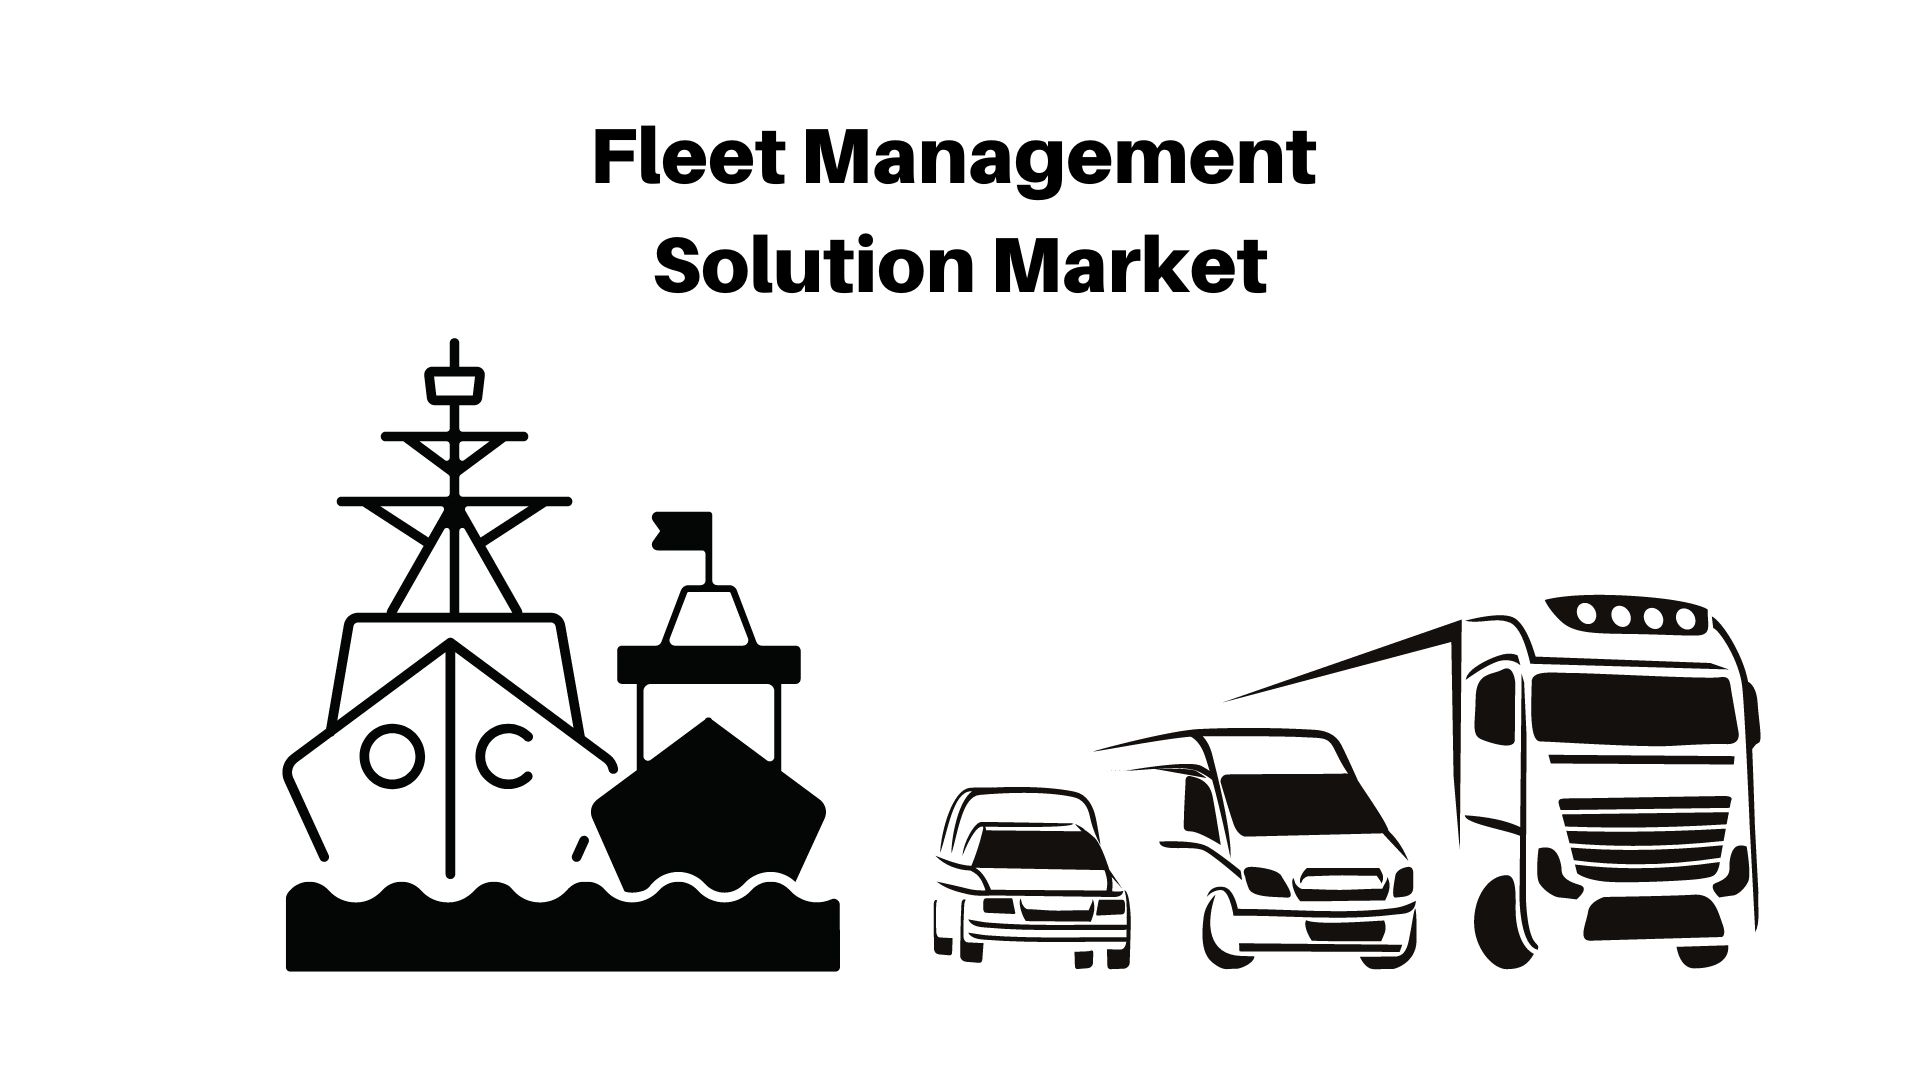 Fleet Management Solution Market Expected to Expand at a Growing CAGR of 15.5% through 2033